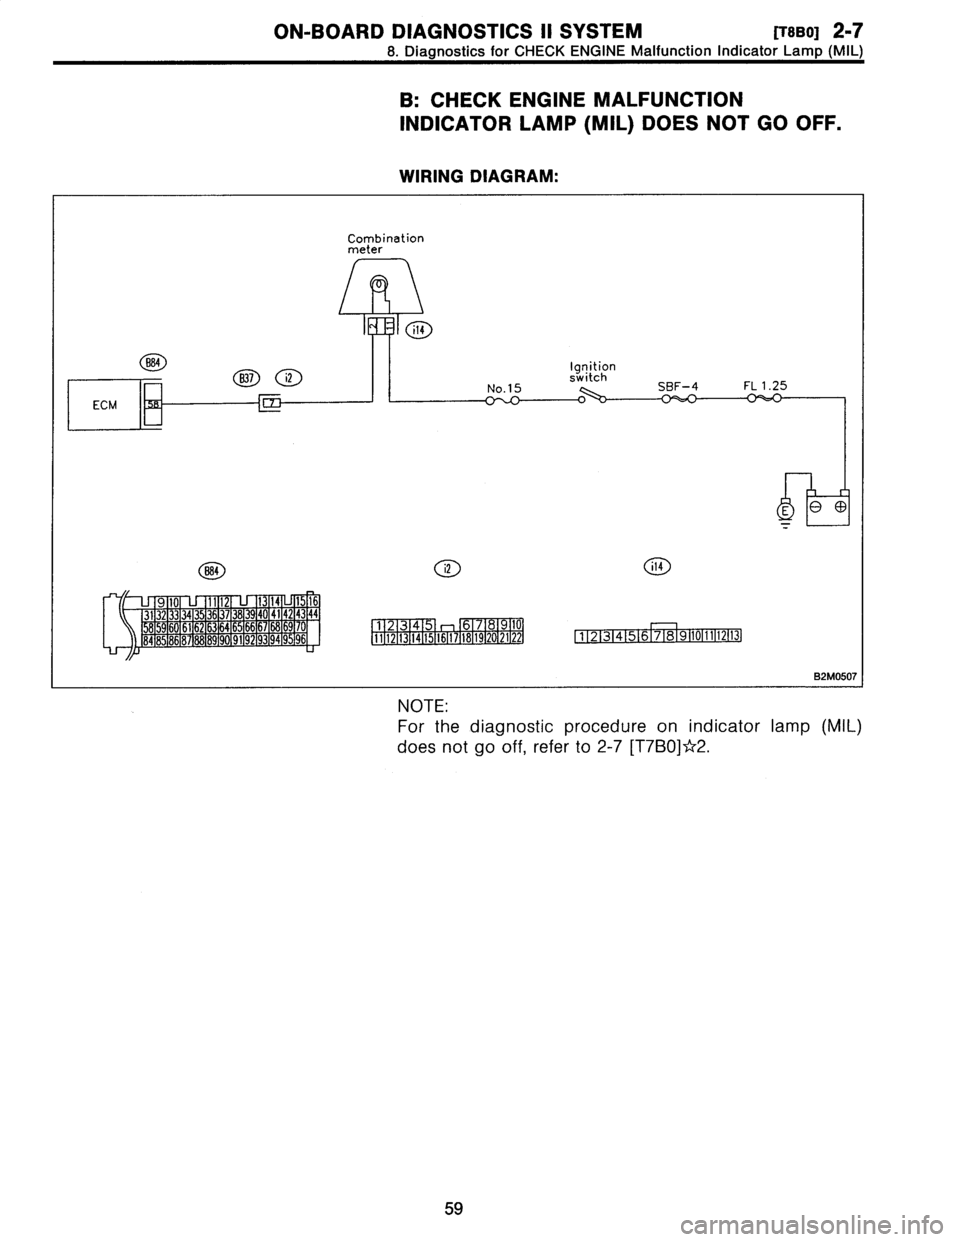 SUBARU LEGACY 1996  Service Repair Manual 
ON-BOARD
DIAGNOSTICS
II
SYSTEM
[TBSO]
2-7
8
.
Diagnostics
for
CHECK
ENGINE
Malfunction
Indicator
Lamp
(MIL)

B
:
CHECK
ENGINE
MALFUNCTION

INDICATOR
LAMP
(MIL)
DOES
NOT
GO
OFF
.

WIRING
DIAGRAM
:

Co